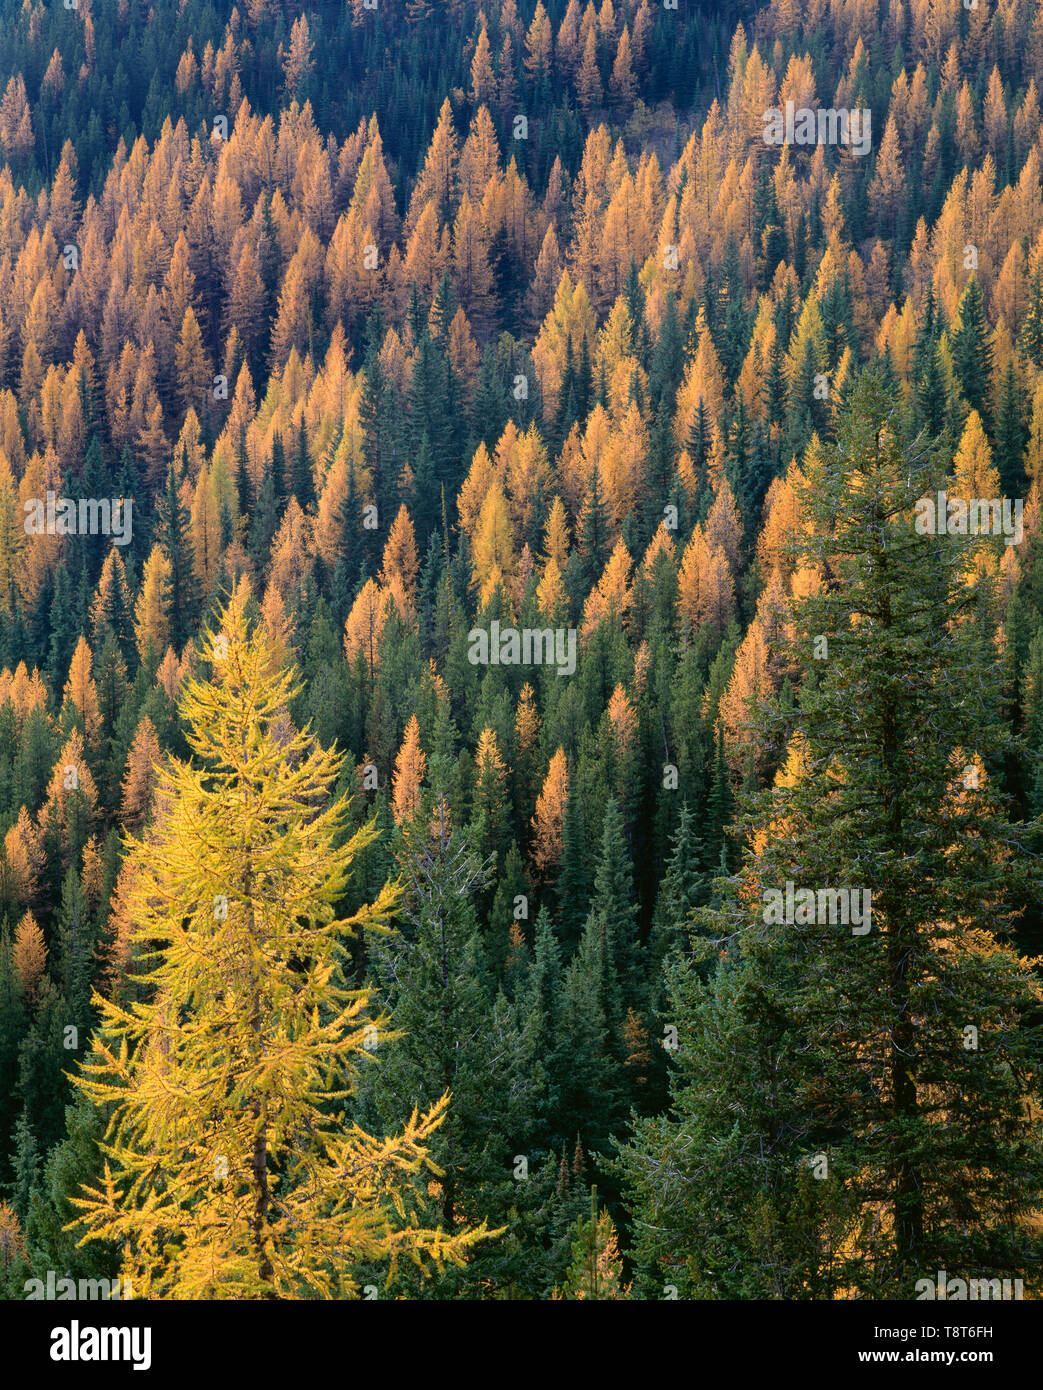 USA, Washington, Colville National Forest, Autumn colored western larch trees stand out in mixed coniferous forest with Douglas fir and pine. Stock Photo